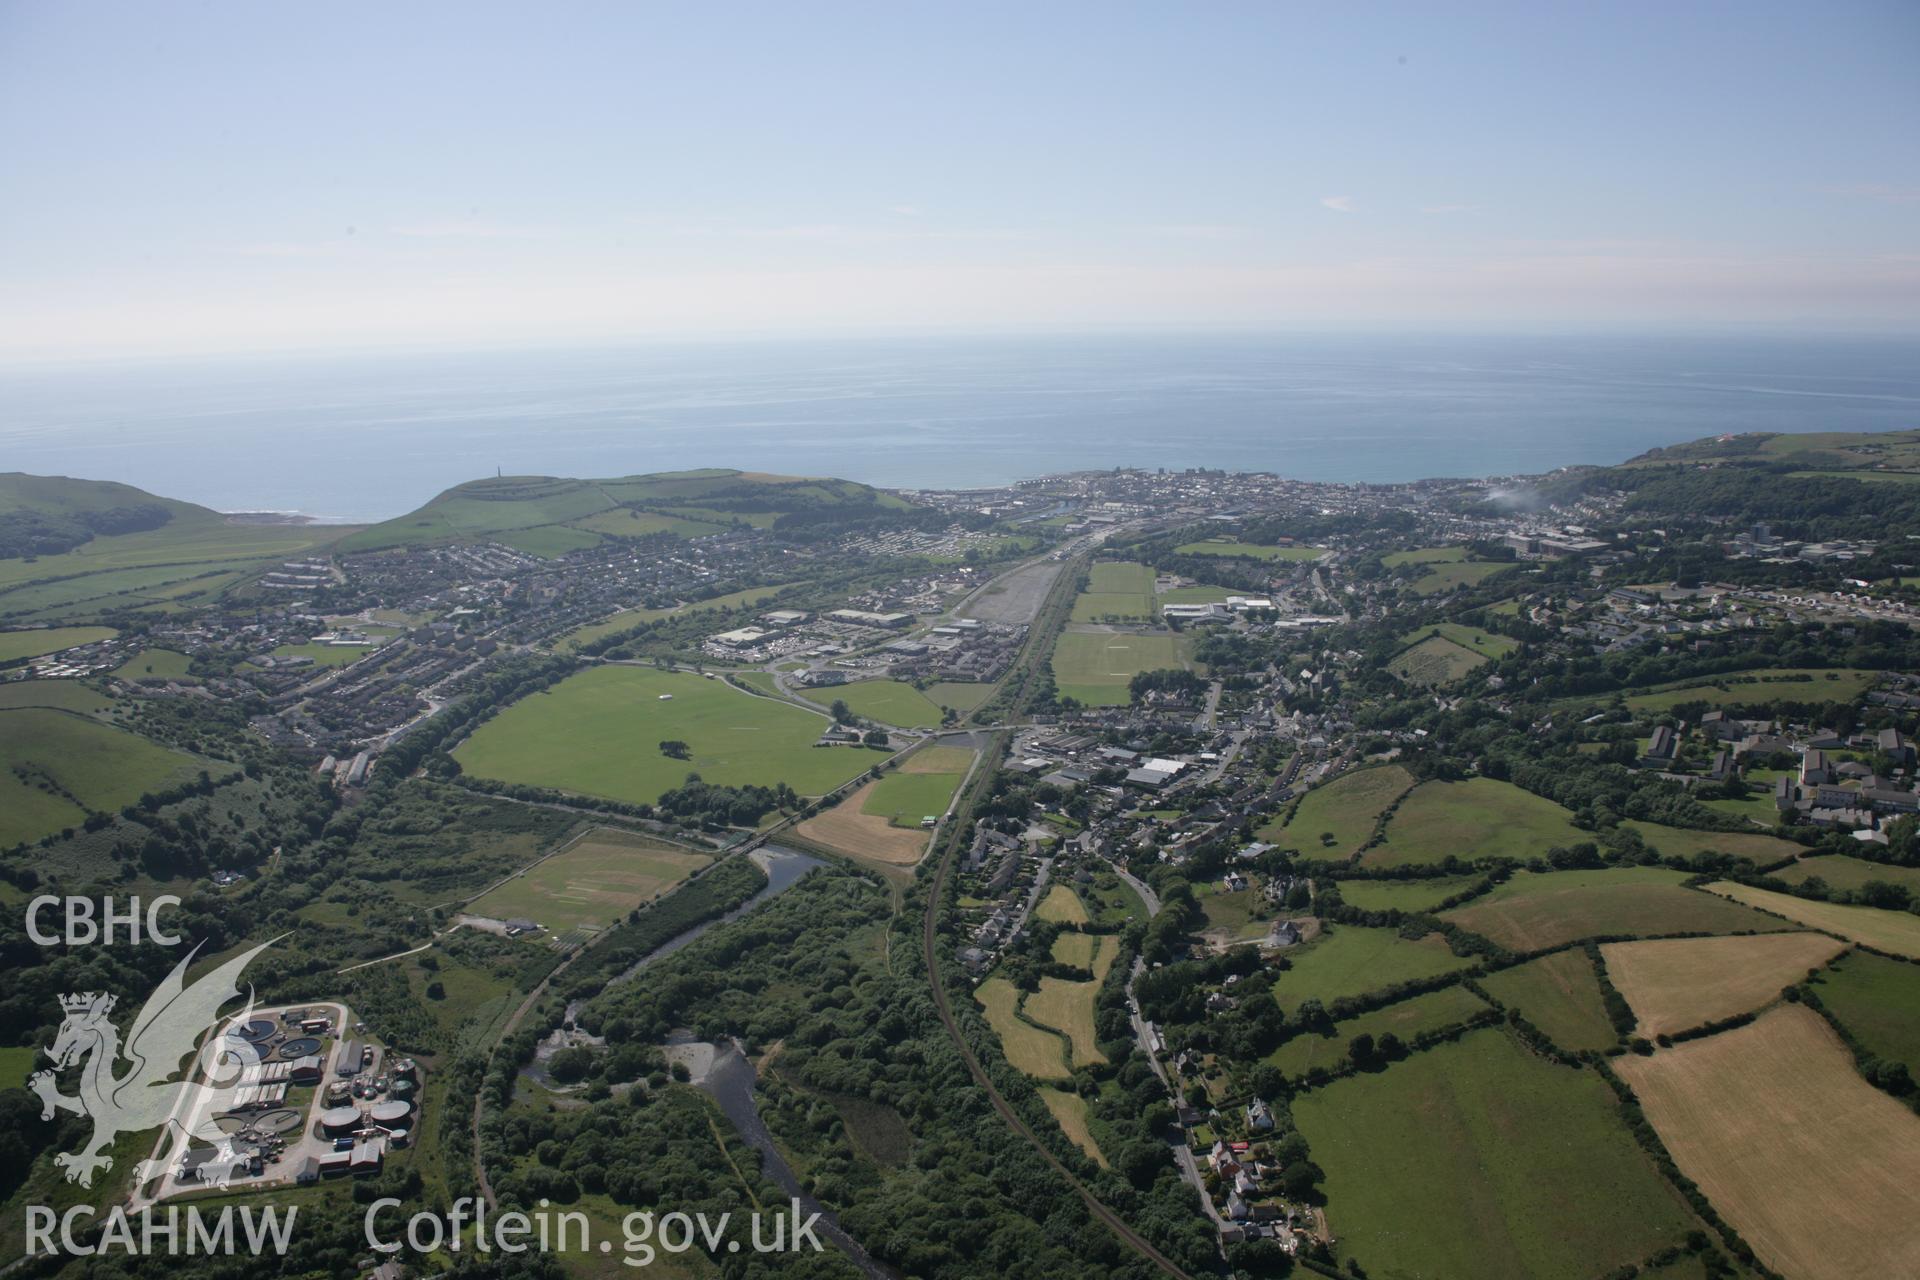 RCAHMW colour oblique aerial photograph of Pen Dinas Hillfort, and town of Aberystwyth, shown in wide view from the east. Taken on 23 June 2005 by Toby Driver